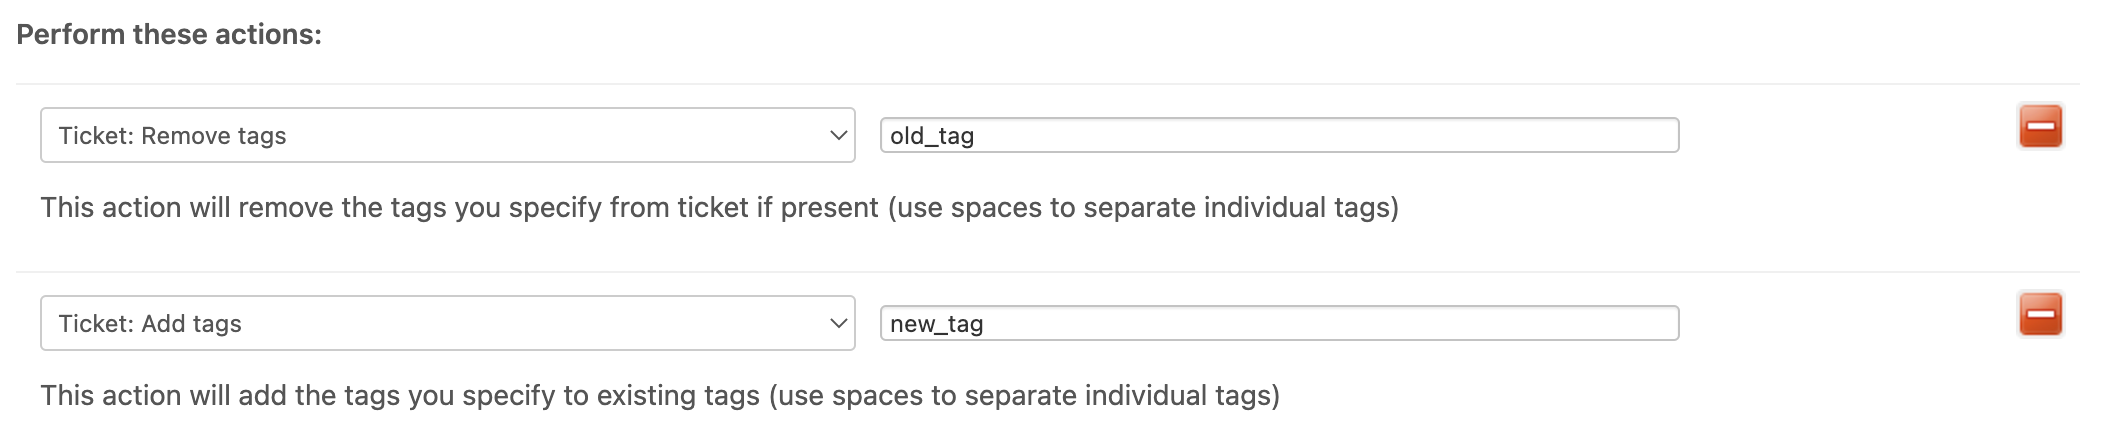 Actions of Backfill checked tickets with updated tag automation